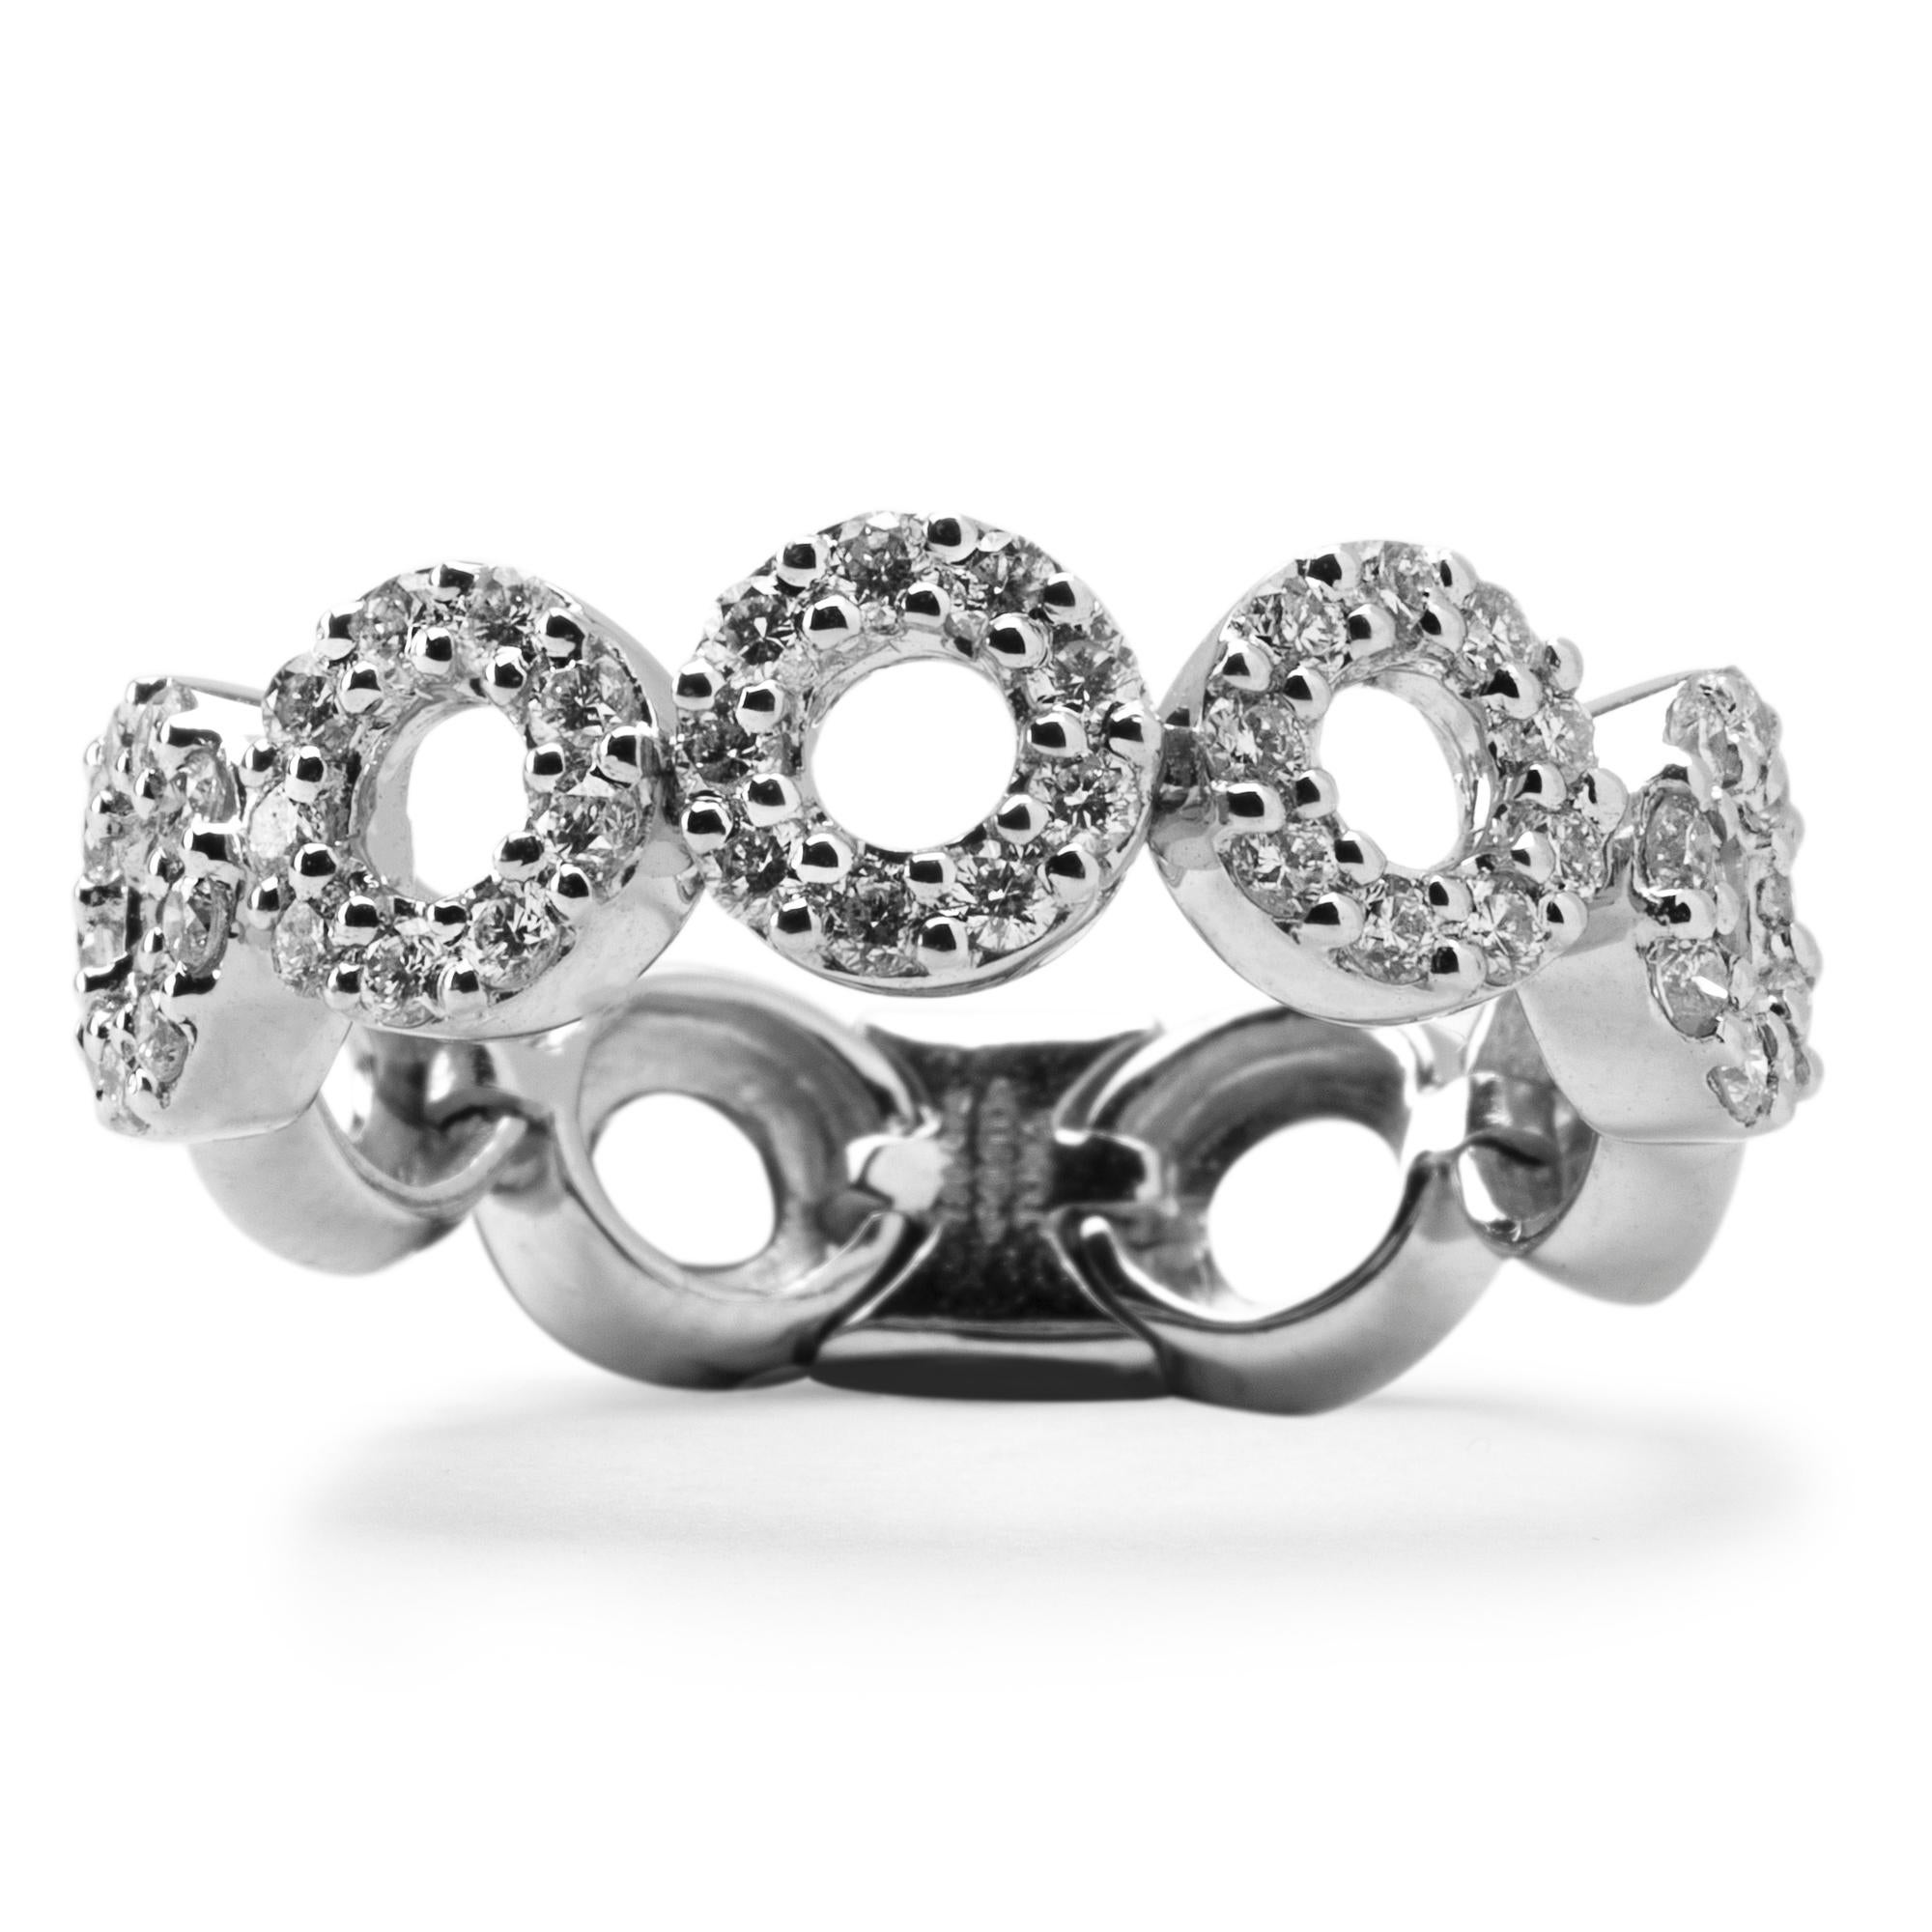 Alex Jona design collection, hand crafted in Italy, 18 karat white gold band ring, set with a sequence of round elements featuring 0.80 carats of white diamonds, G color, VVS1 clarity. US size 6.75. Can be sized to any specification.  
Alex Jona